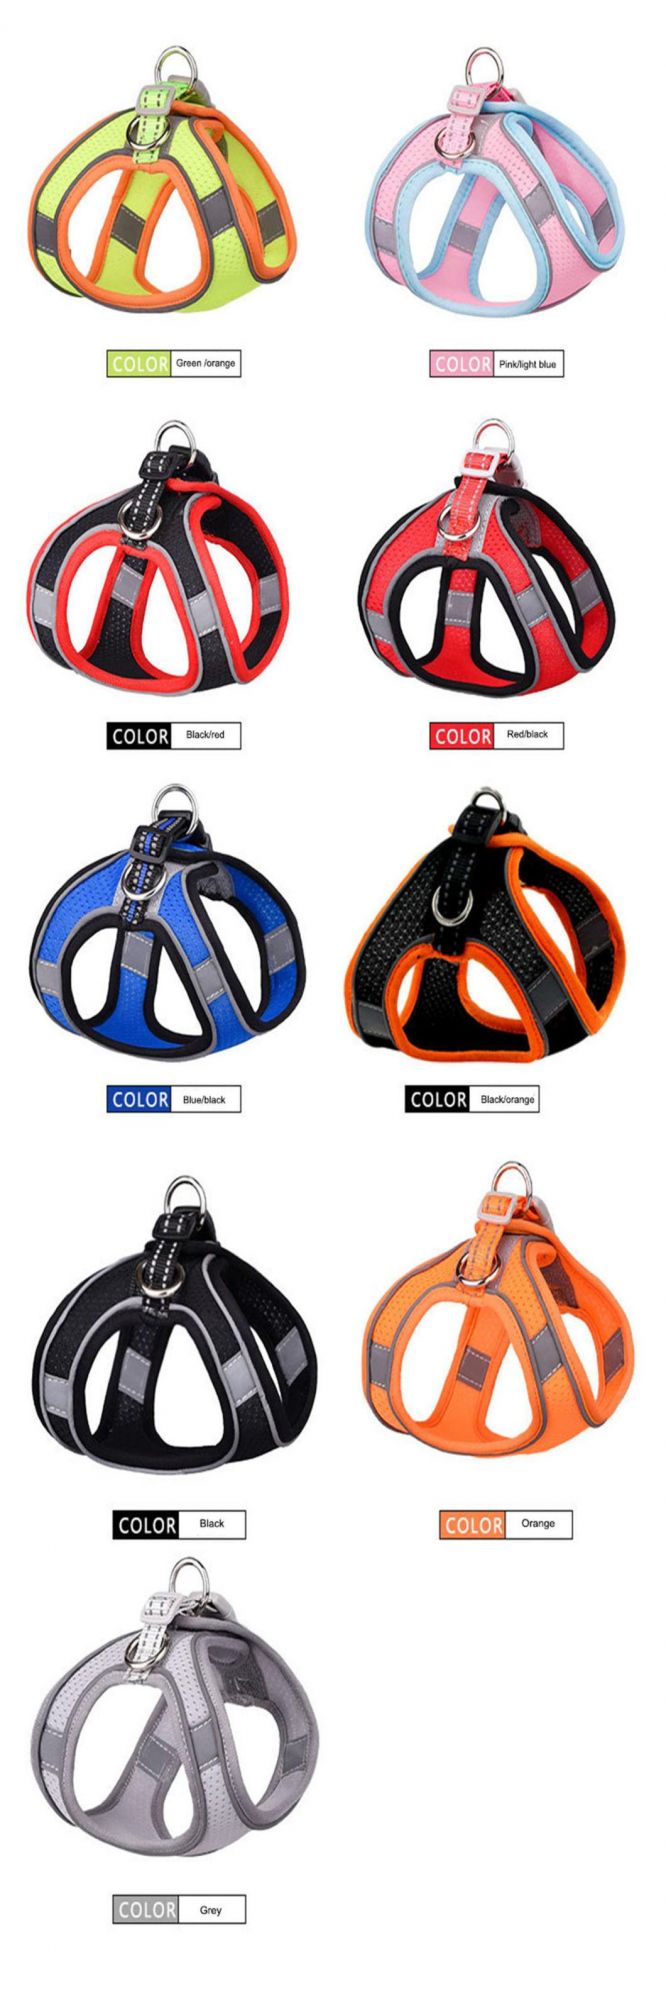 Latest High Quality Breathable Reflective Pet Harness with Matching Pet Leash